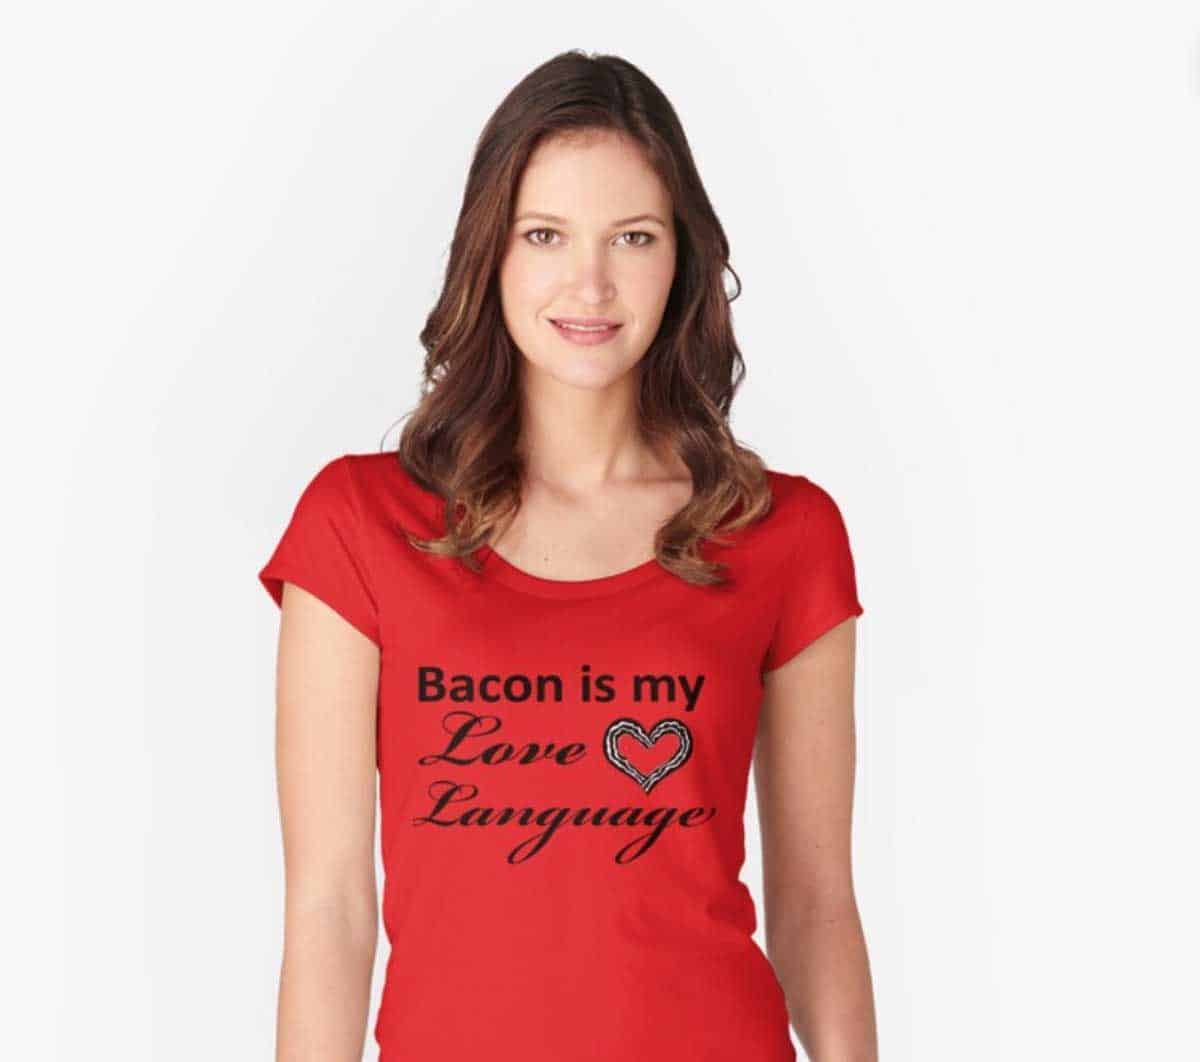 A young woman in a red t-shirt which is printed with "Bacon is my Love Language."